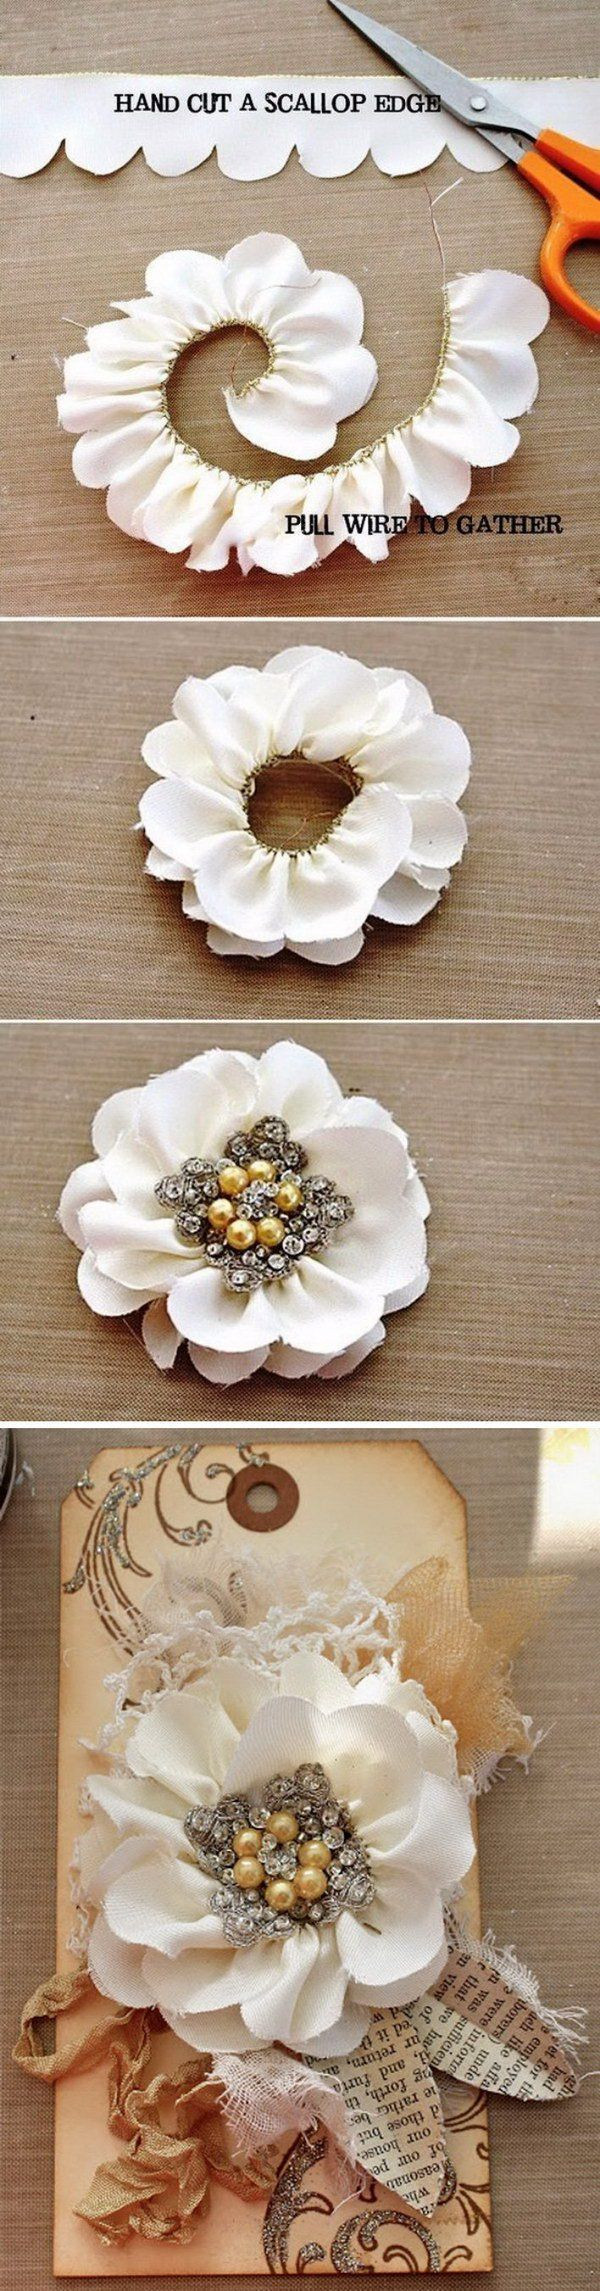 DIY Victorian Decor
 2279 best images about Victorian decorating ideas on